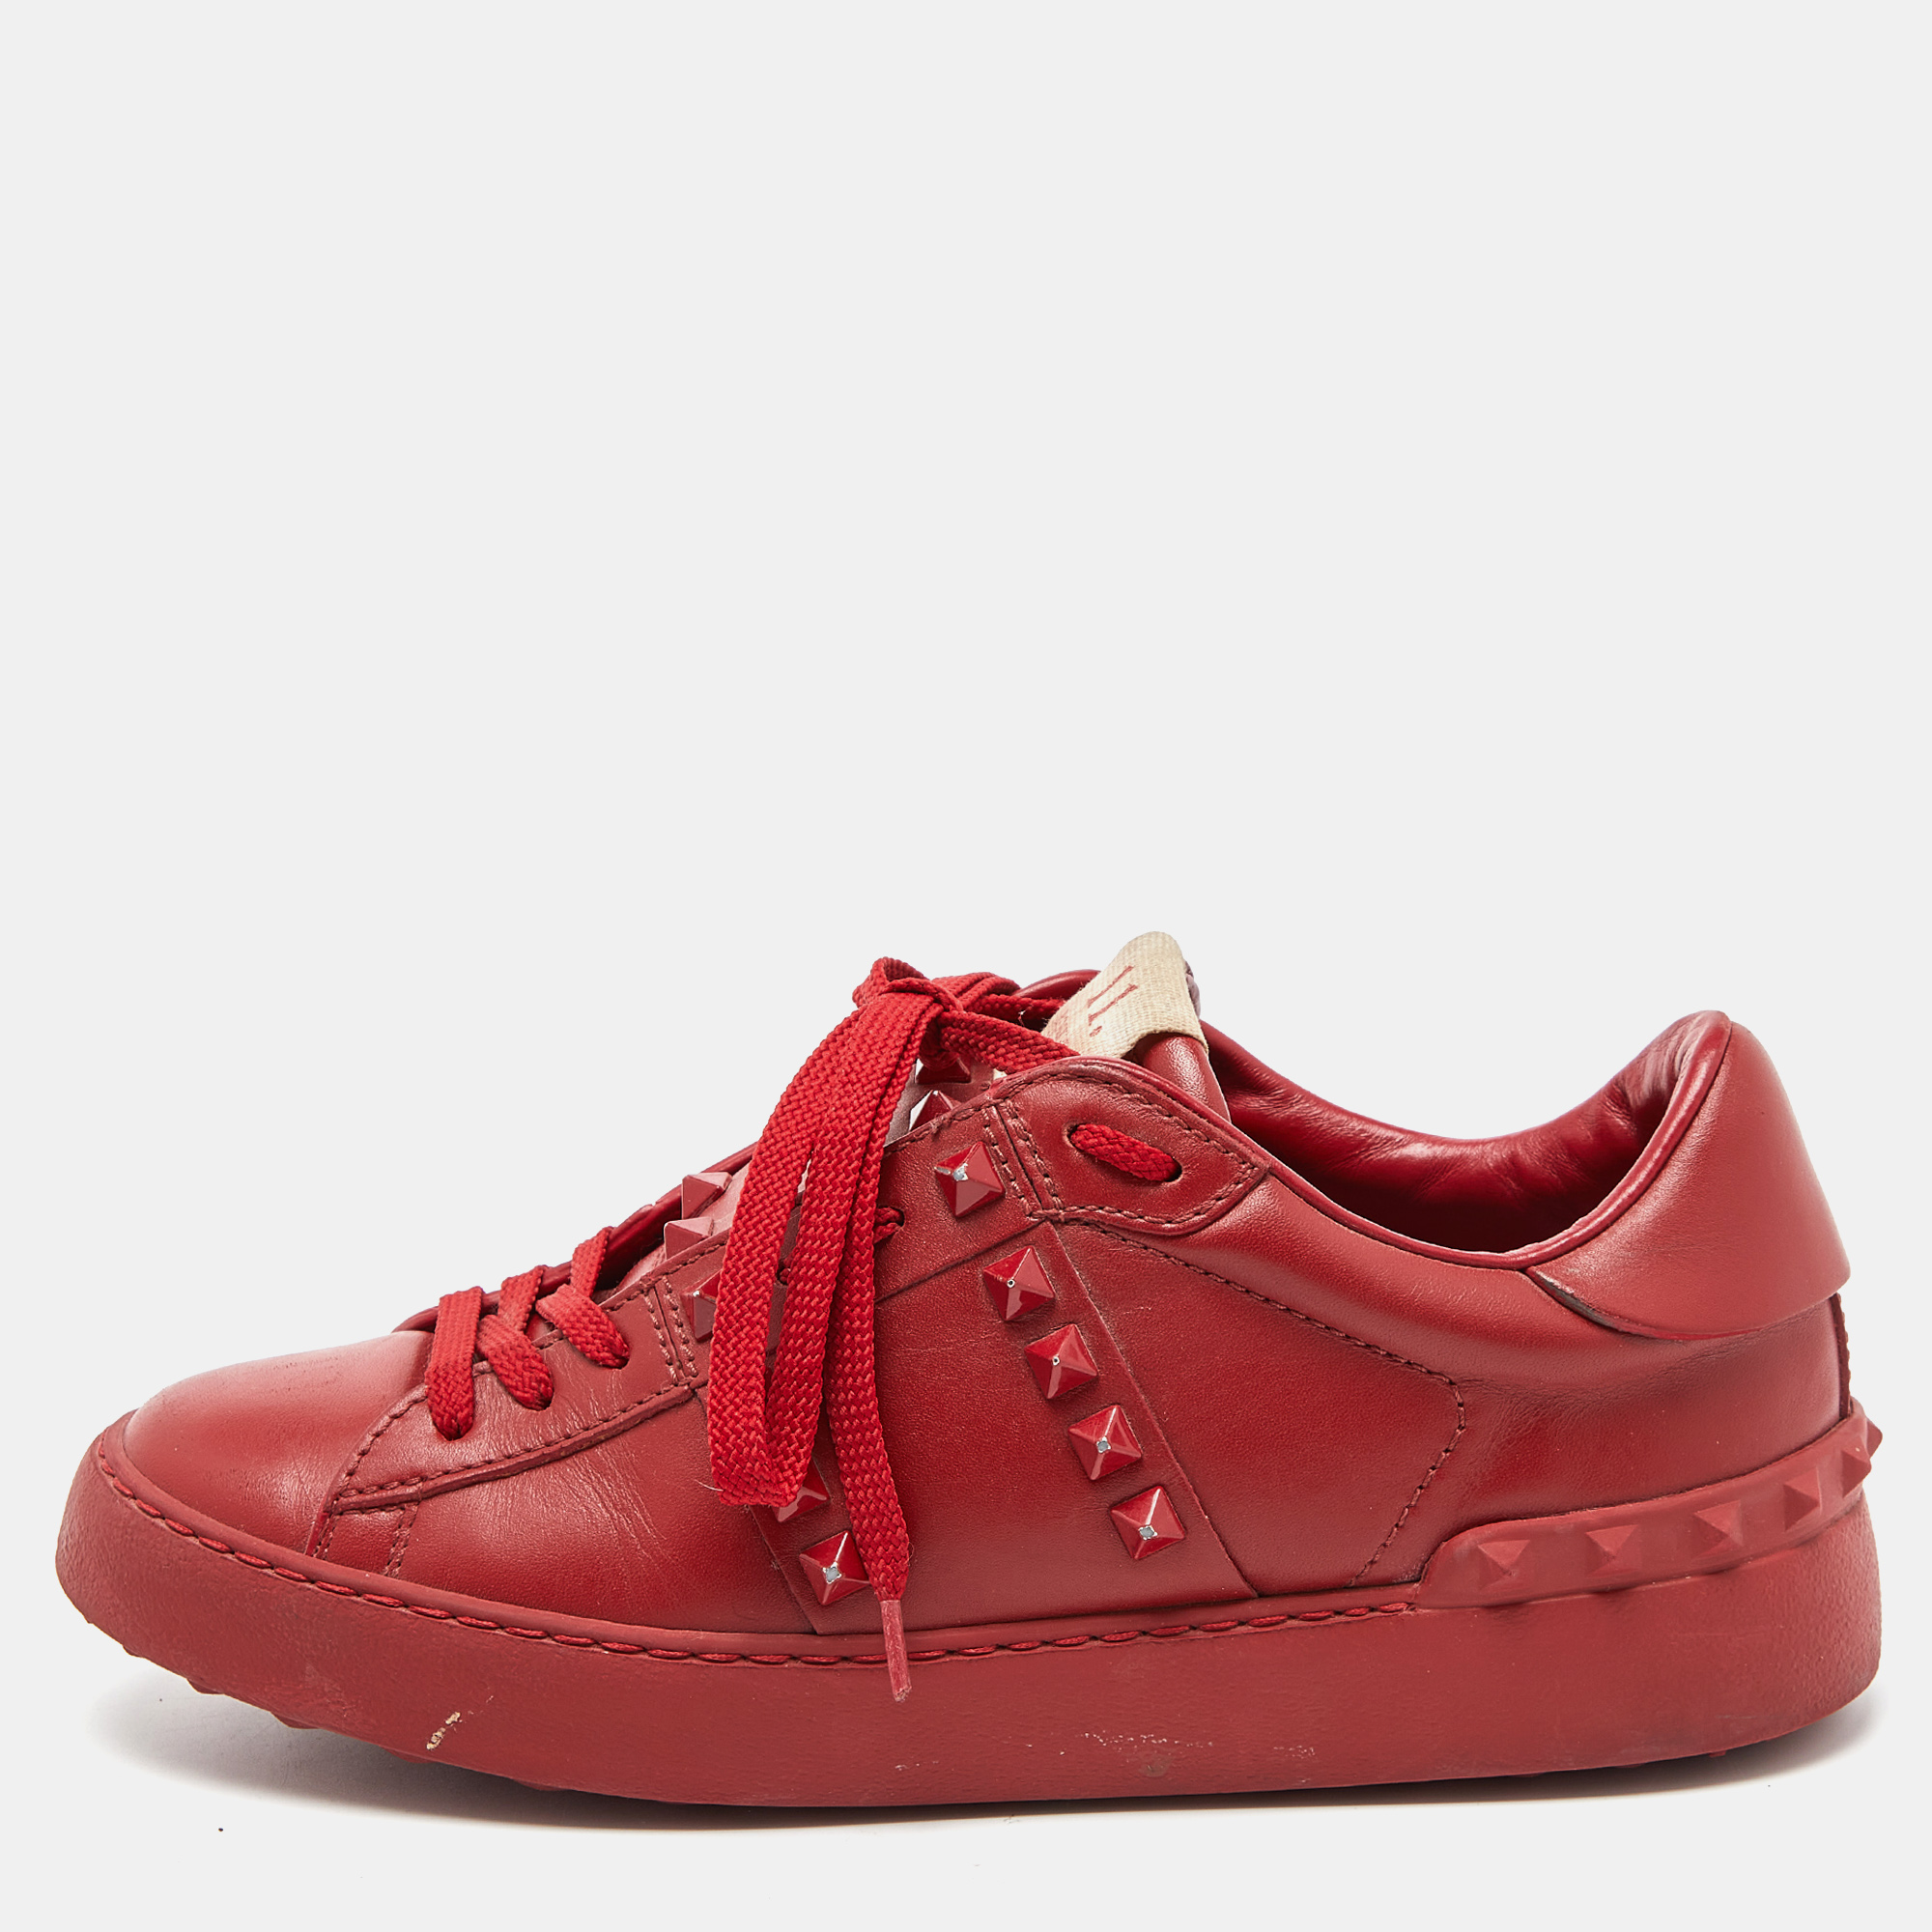 Pre-owned Valentino Garavani Red Leather Rockstud Untitled Sneakers Size 37